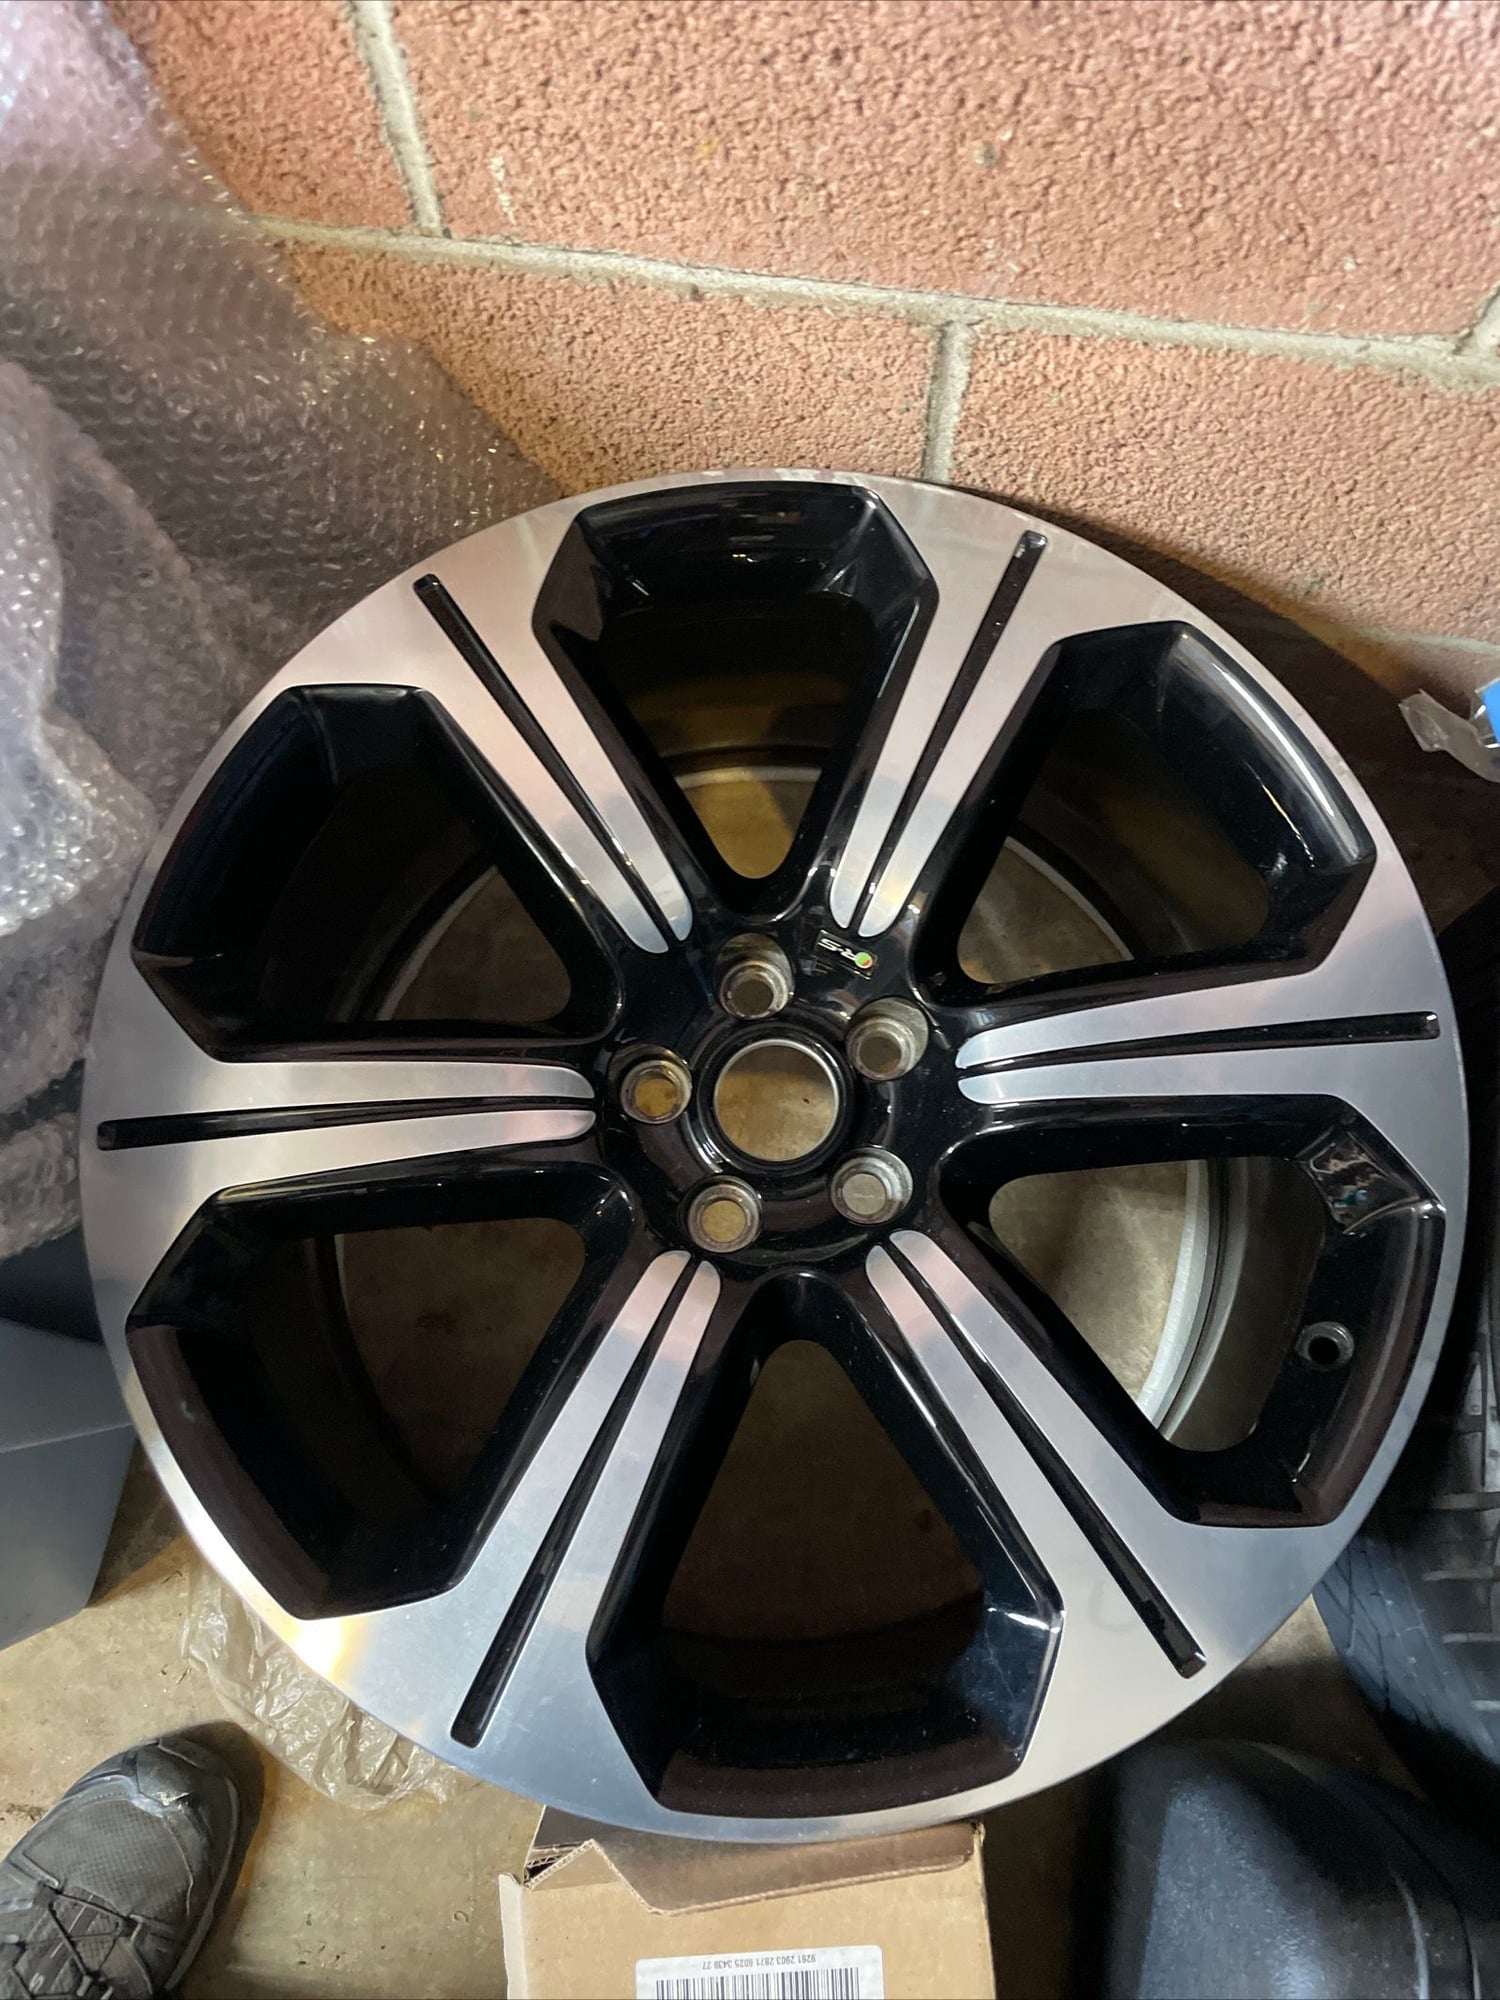 Wheels and Tires/Axles - XF RS Wheels - Quantity 2 - New - All Years  All Models - Redondo Beach, CA 90277, United States